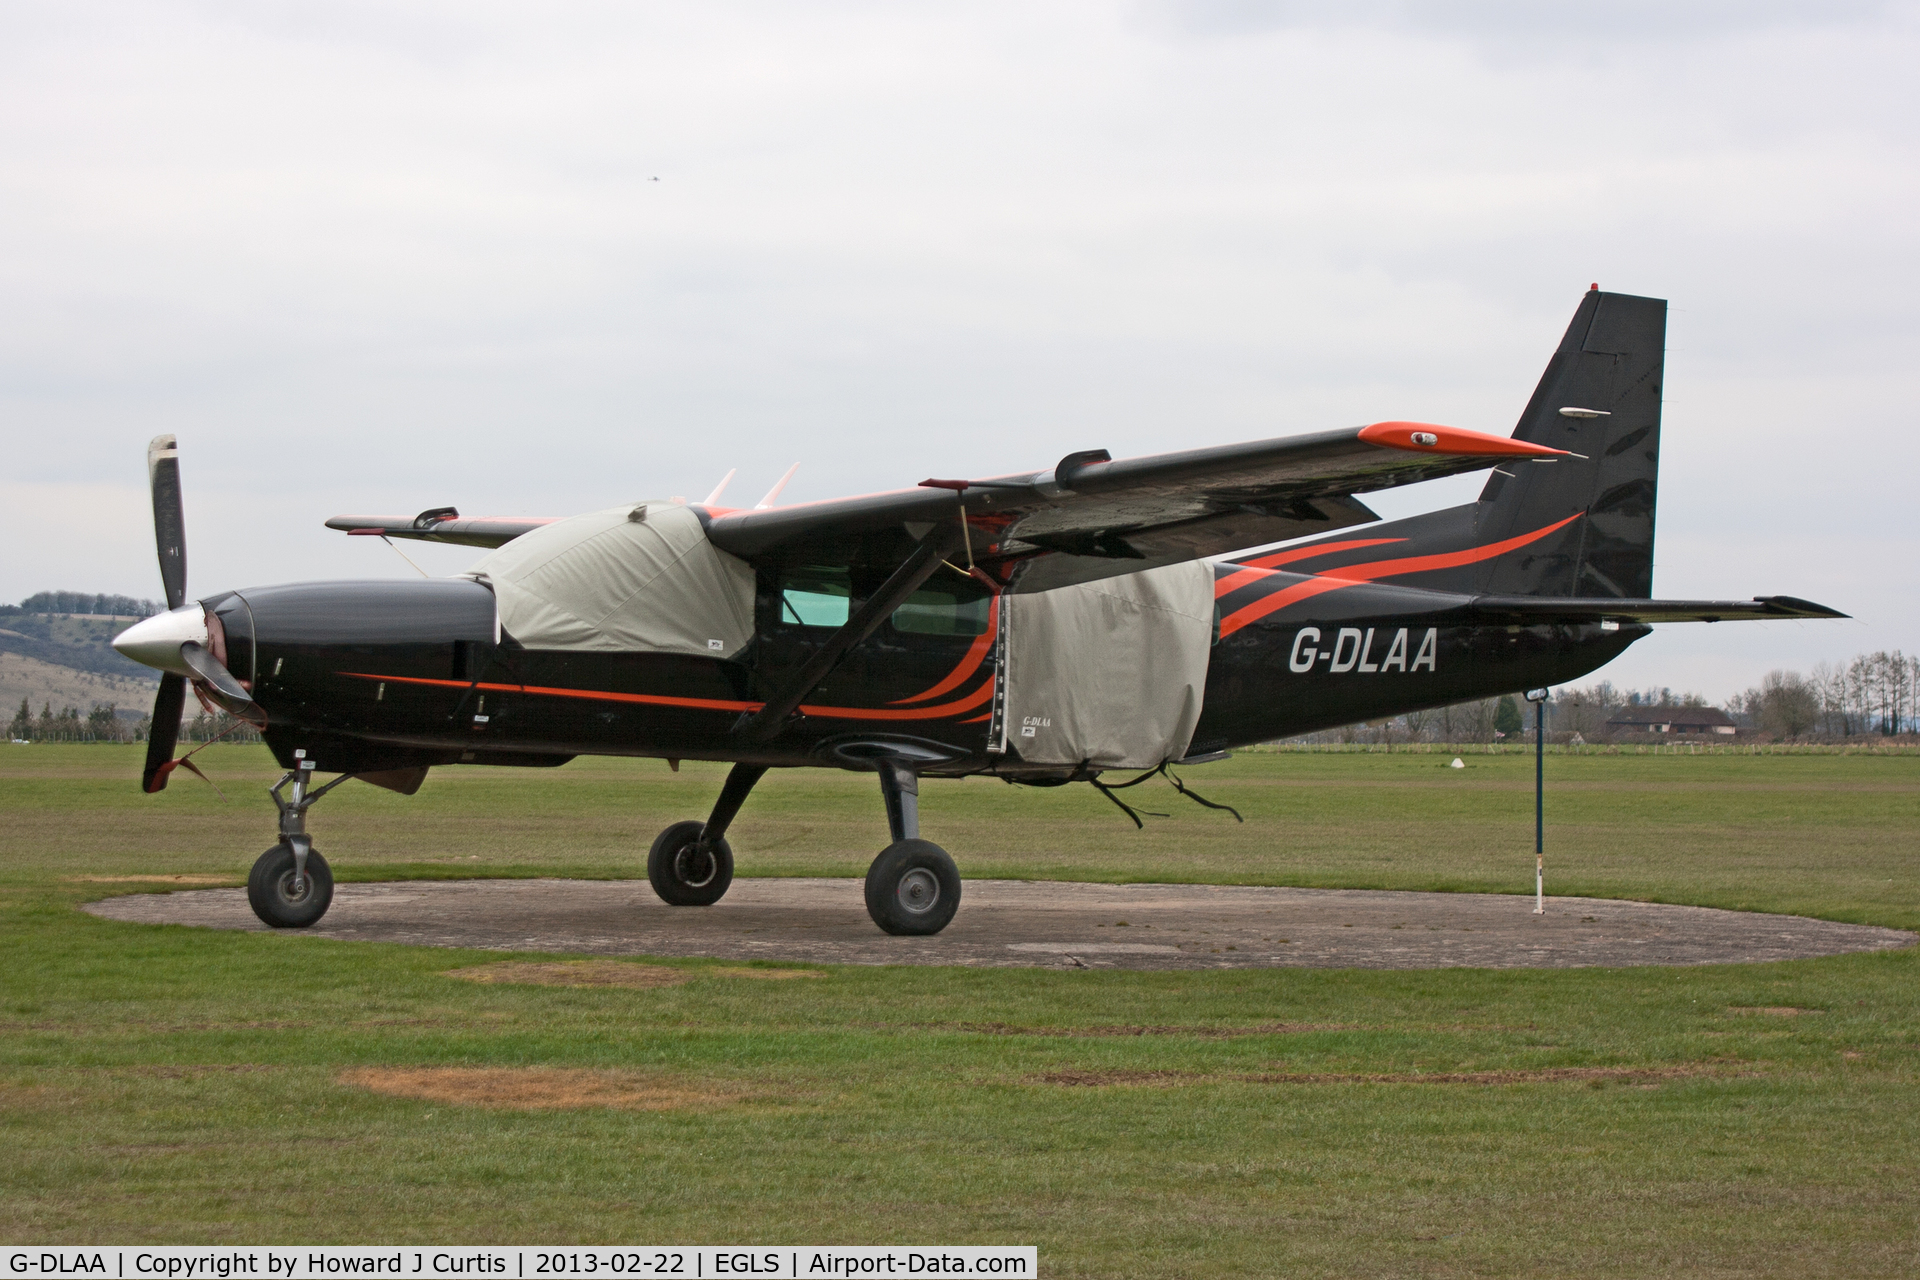 G-DLAA, 2003 Cessna 208 Caravan I C/N 20800367, Used for parachute dropping here.